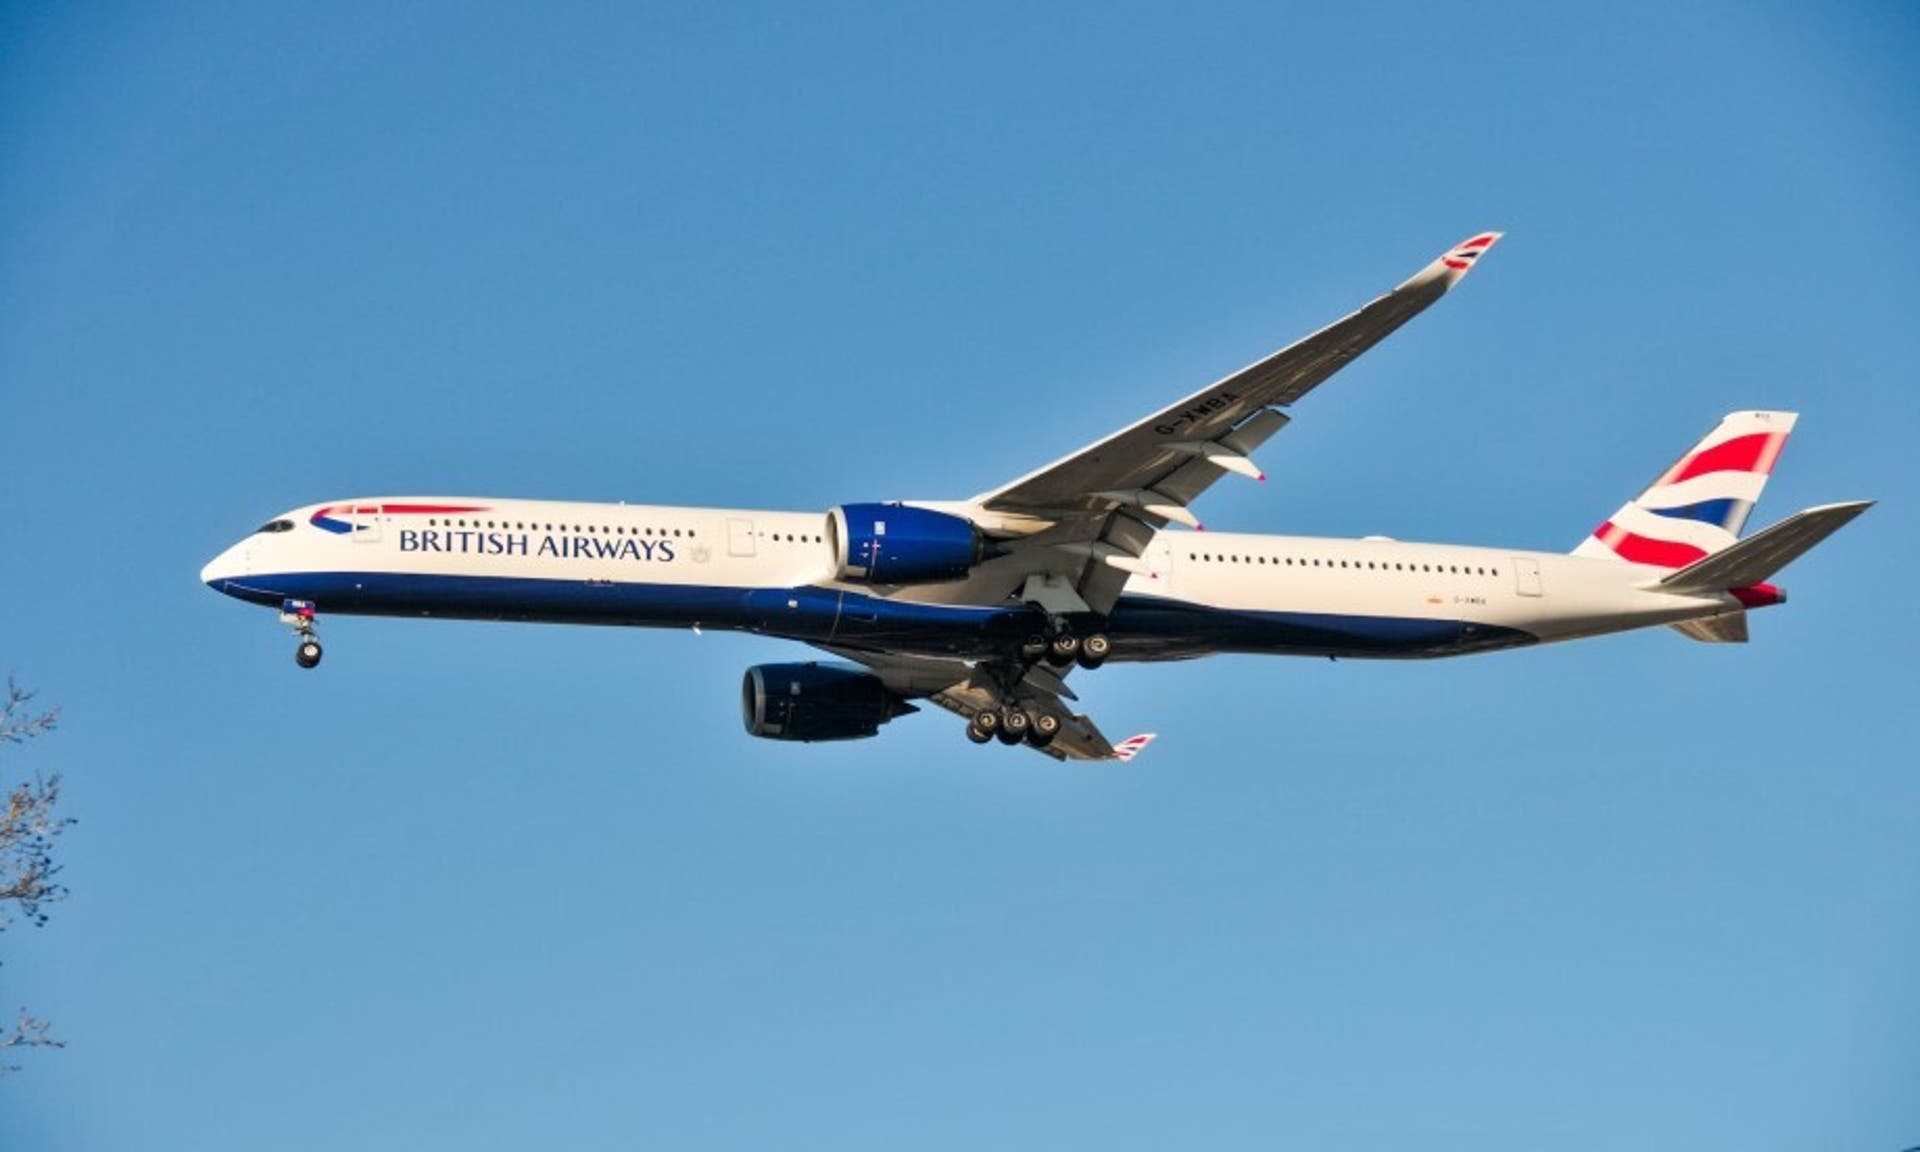  British Airways plane flying through the sky on a sunny day 